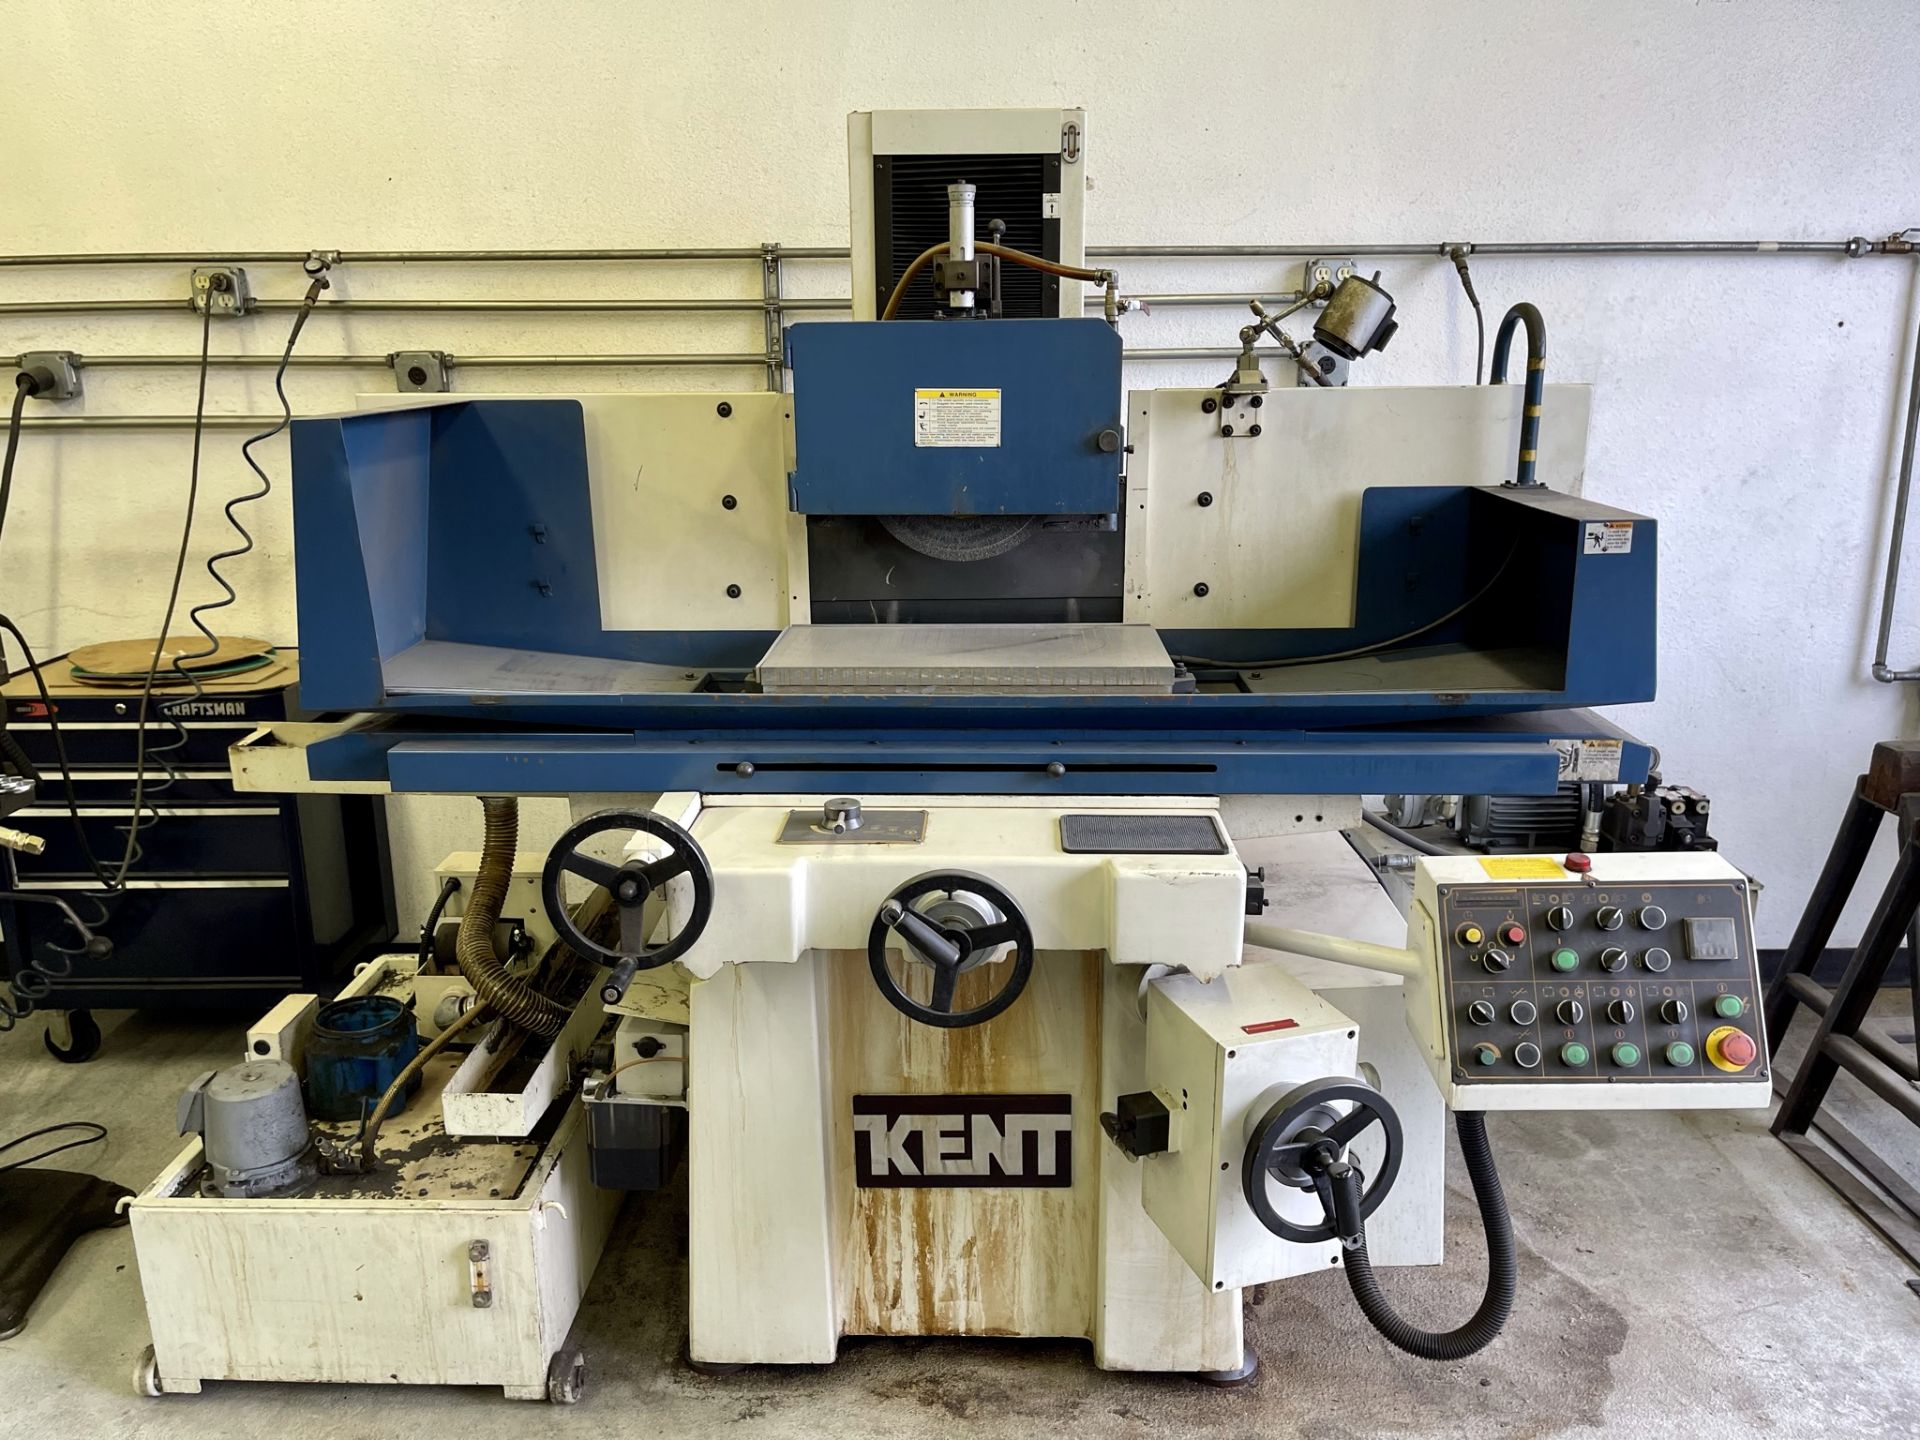 2007 KENT KGS-63AHD SURFACE GRINDER, 3 AXIS, 12" X 24" MAGNETIC CHUCK, AUTO INCREMENTAL DOWN